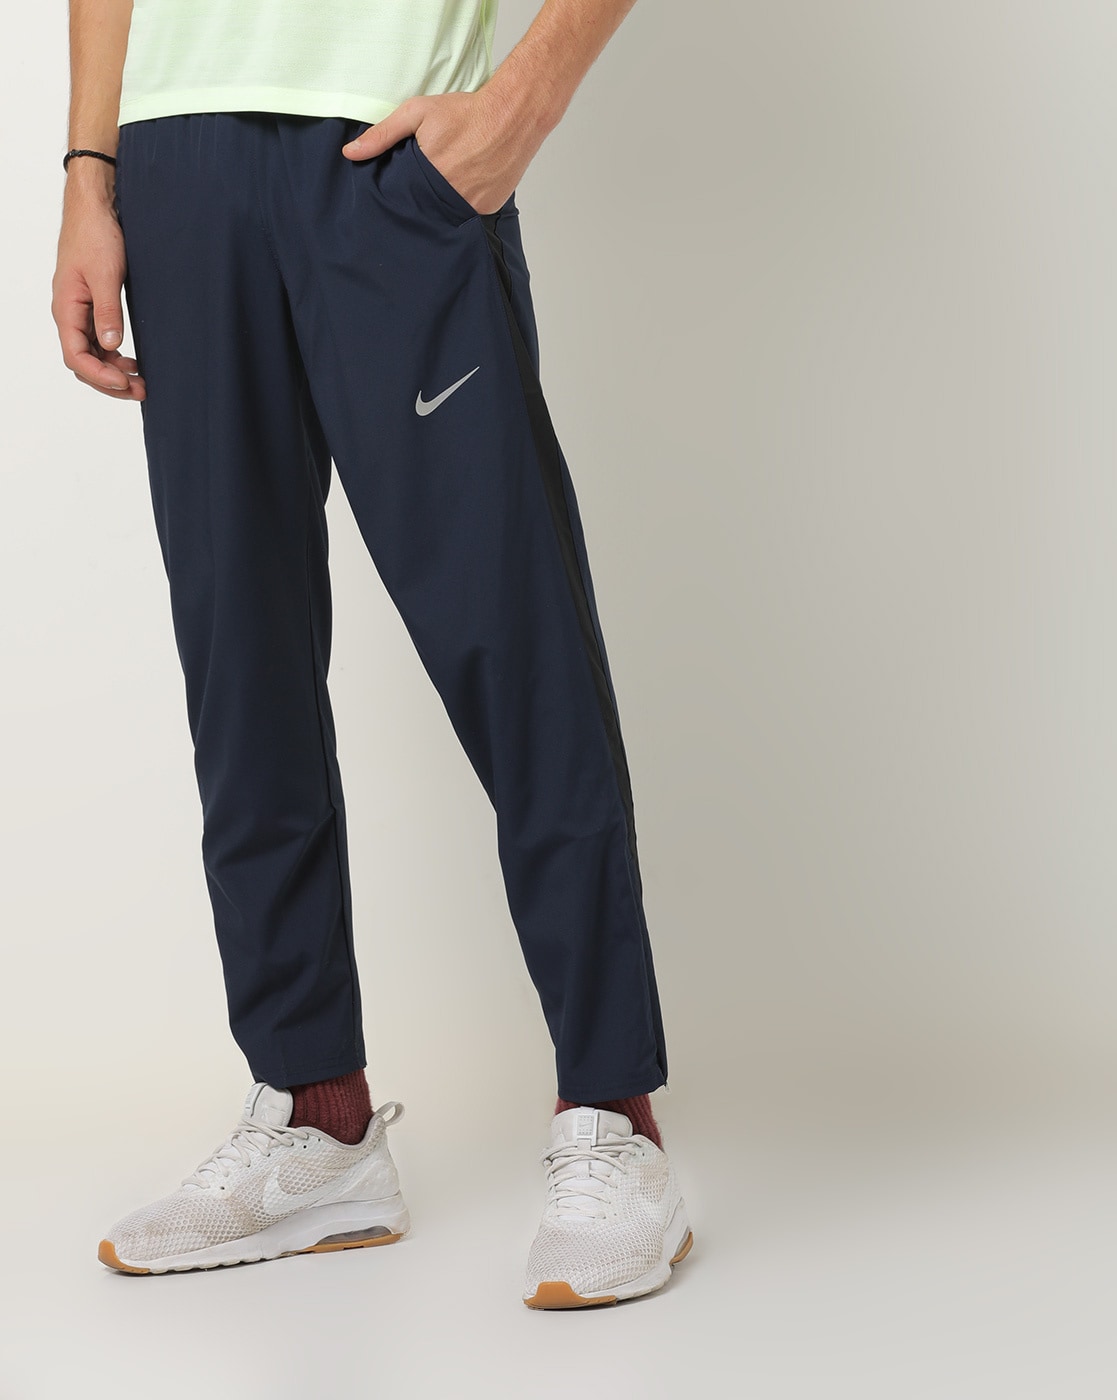 Shop Woven Jogger Pants for Men from latest collection at Forever 21   332516